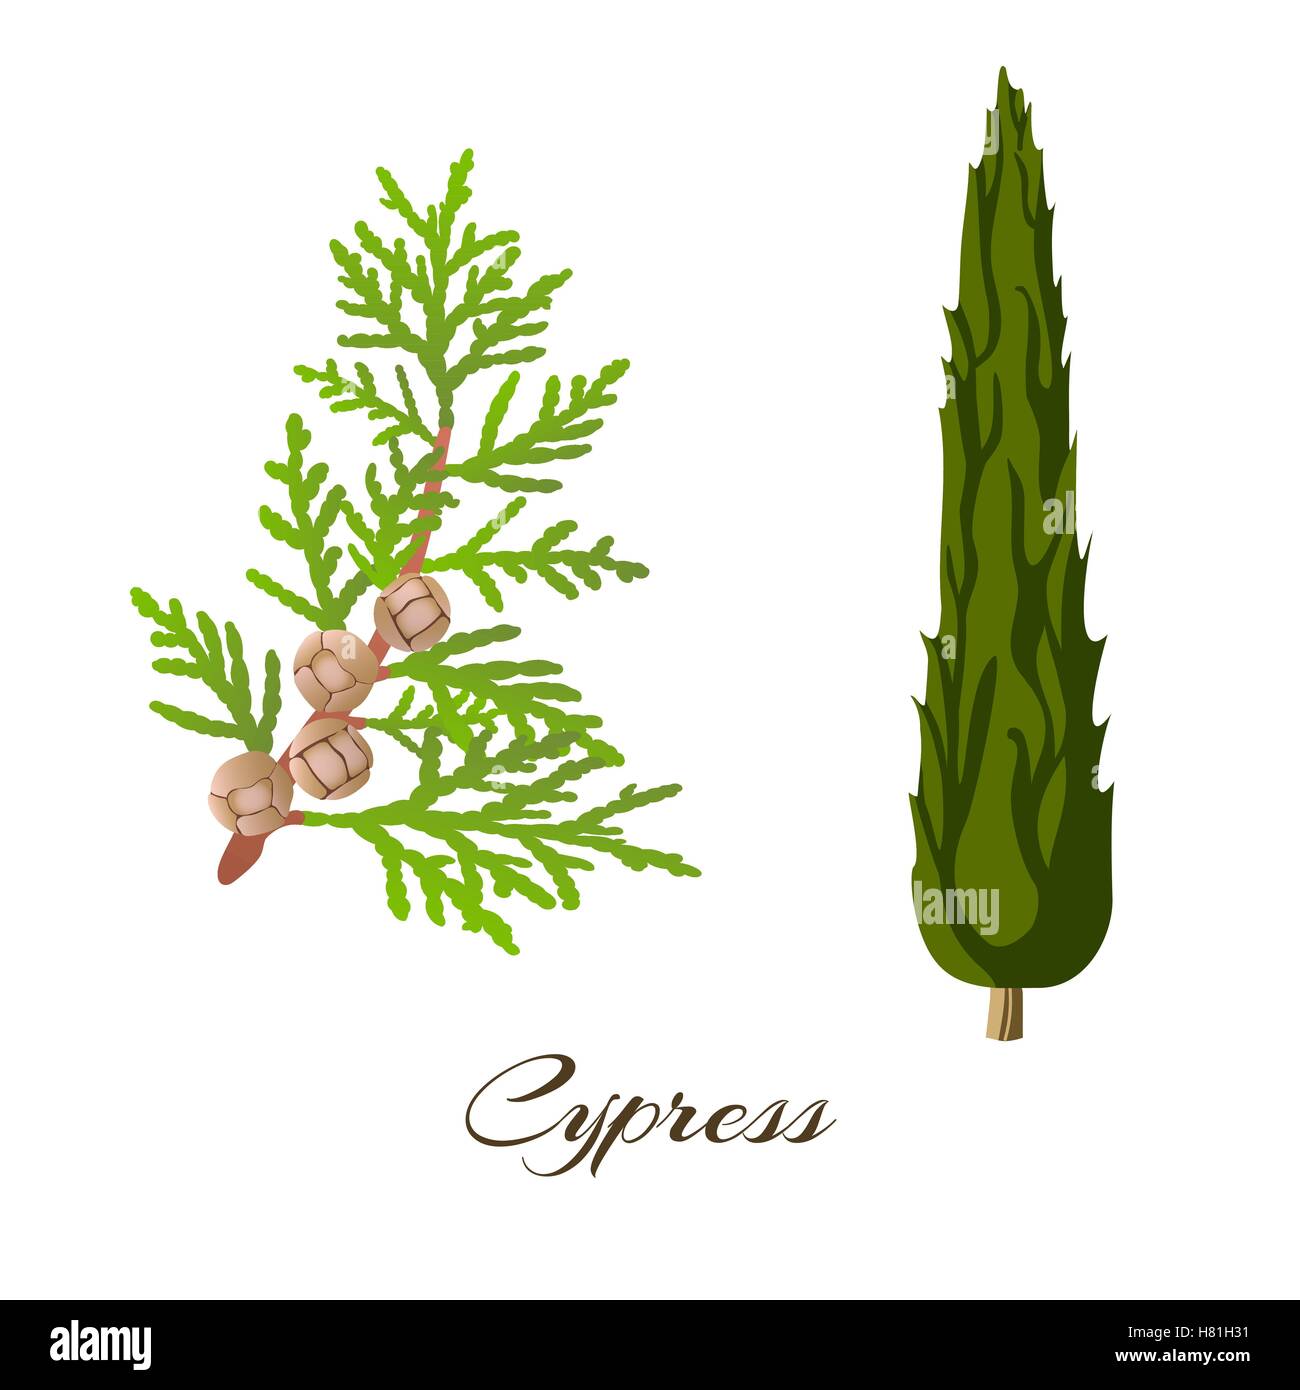 Cypress branch and tree . Cupressus sempervirens . Vector illustration. Stock Vector